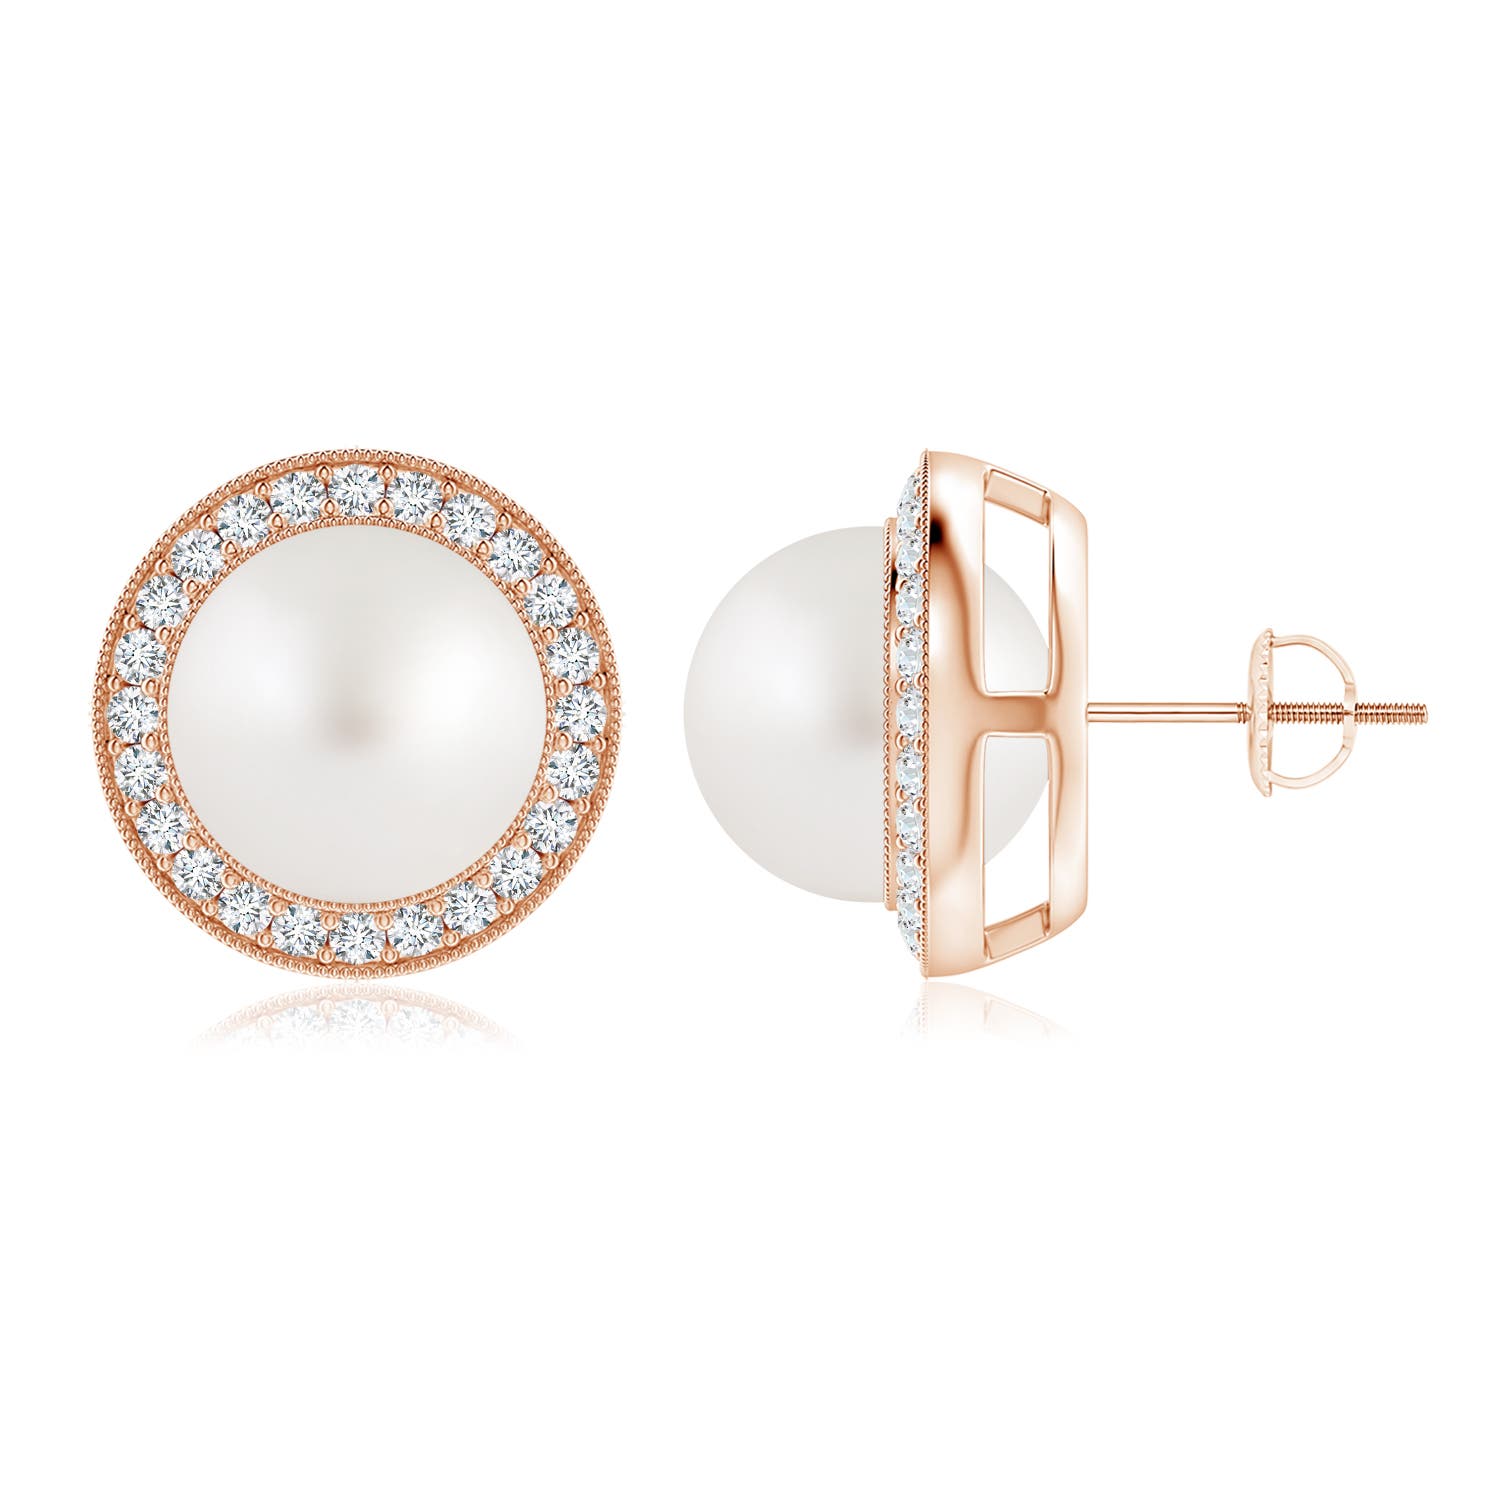 AA - South Sea Cultured Pearl / 15.07 CT / 14 KT Rose Gold